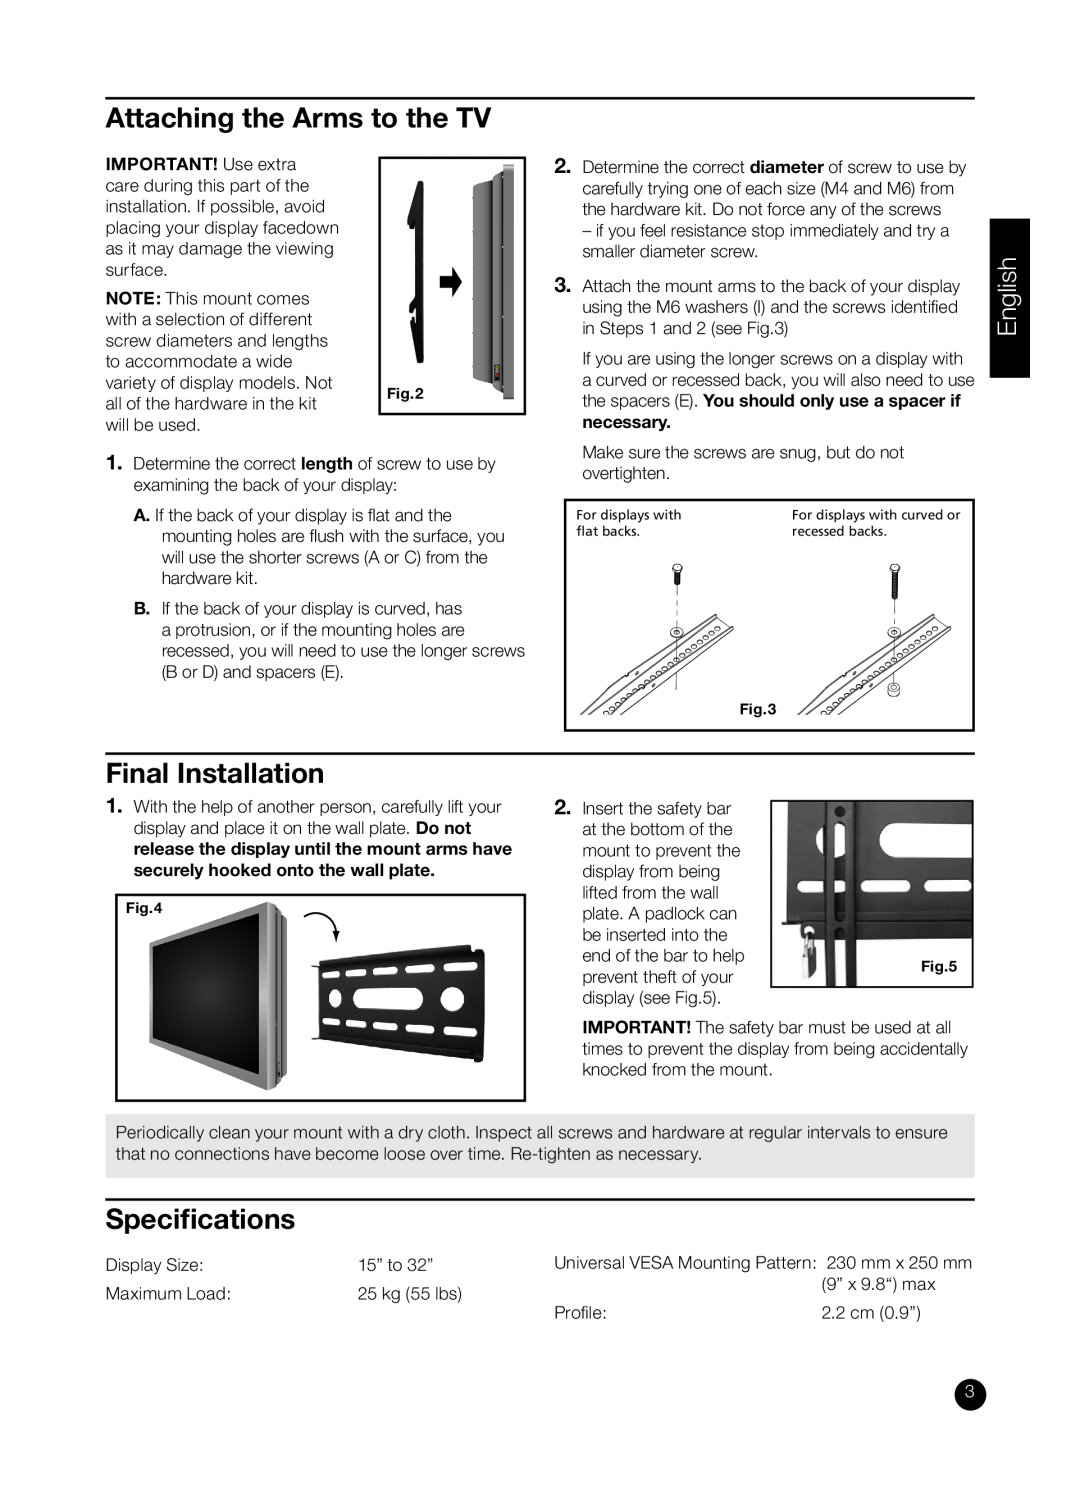 RCA MAF15BKR installation manual Attaching the Arms to the TV, Final Installation, Speciﬁcations, necessary, English 